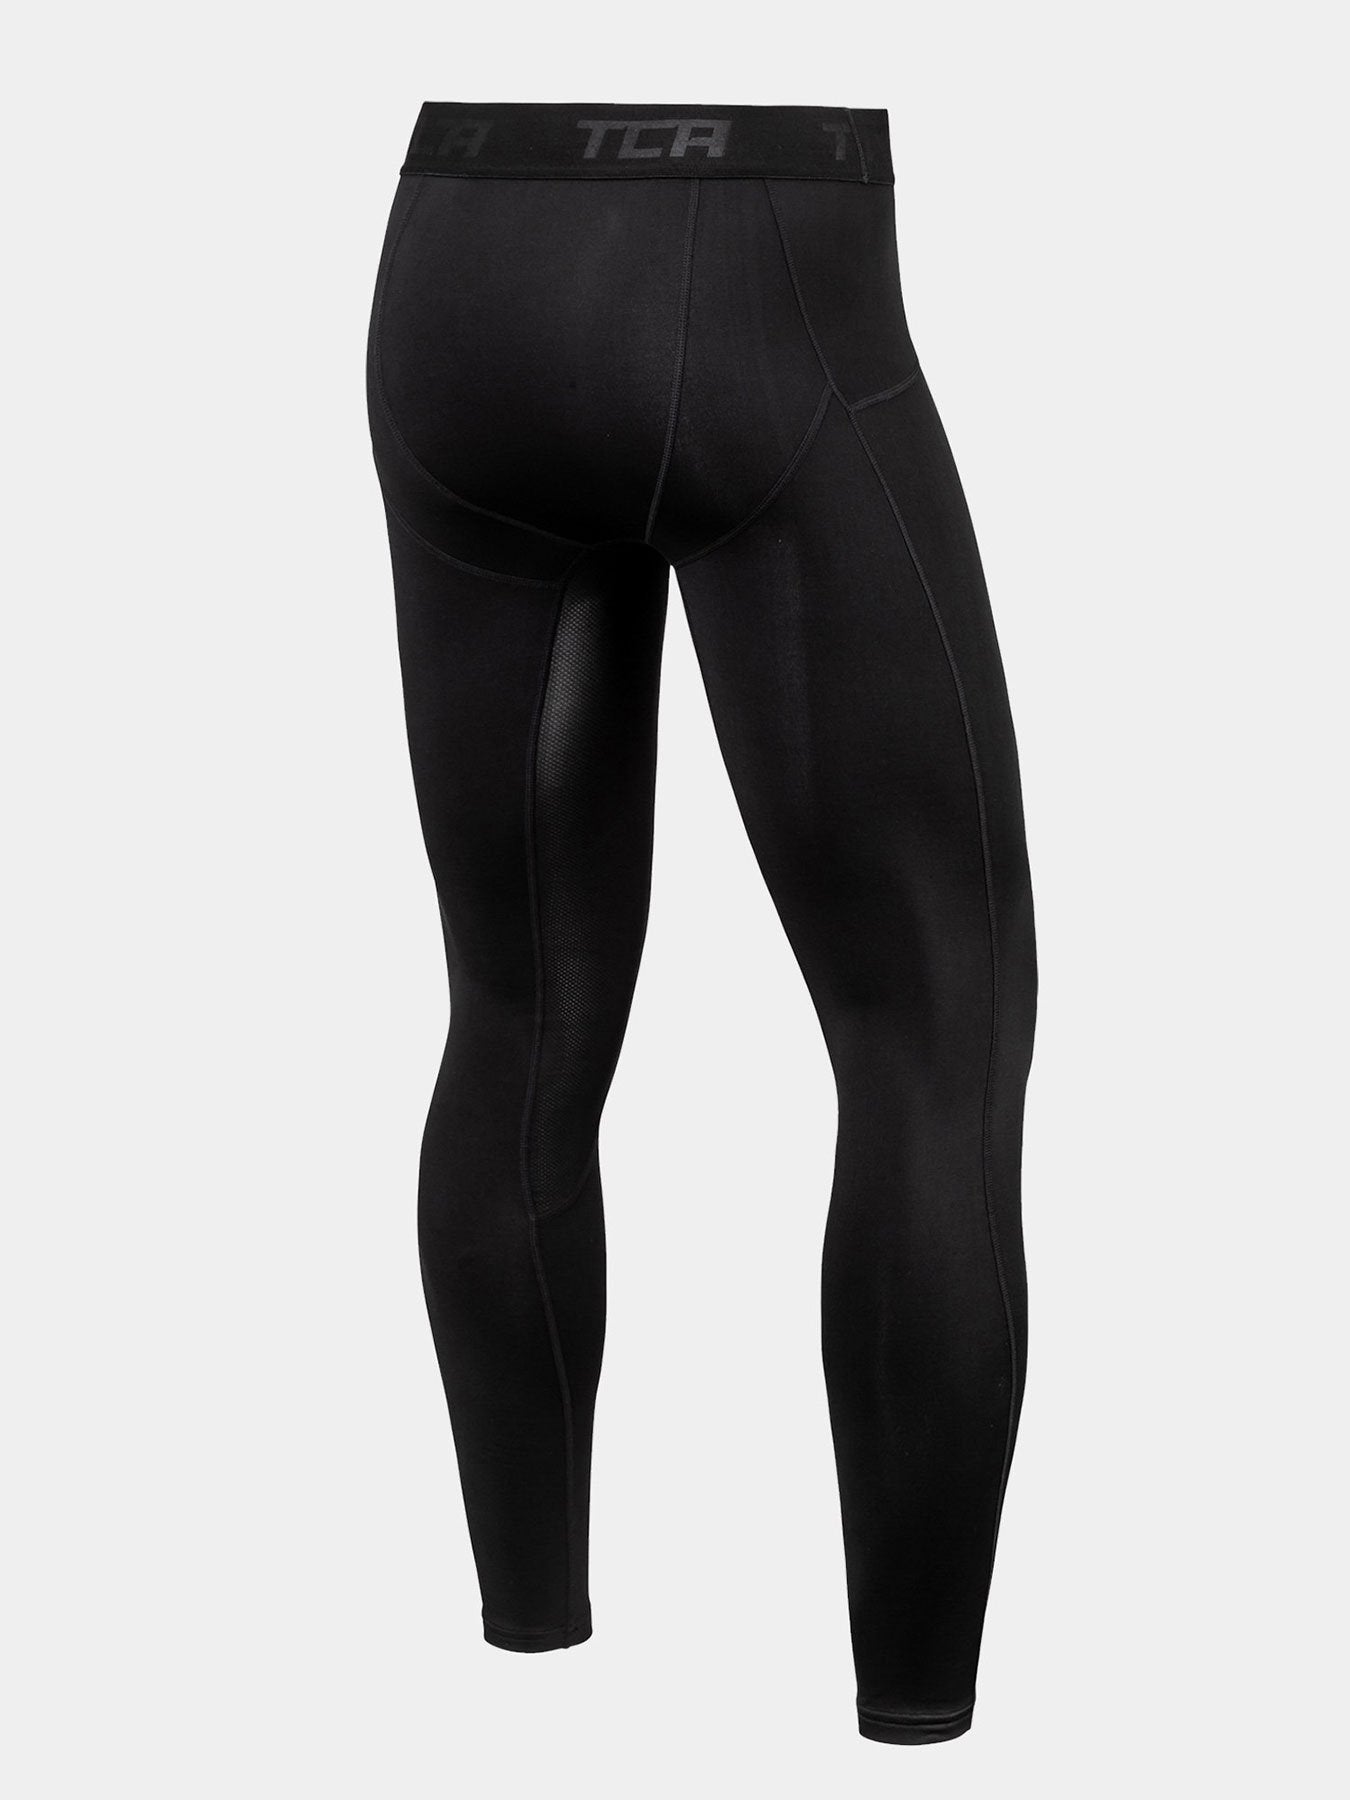 SuperThermal Compression Base Layer Tights For Boys With Brushed Inner Fabric & Side Pocket